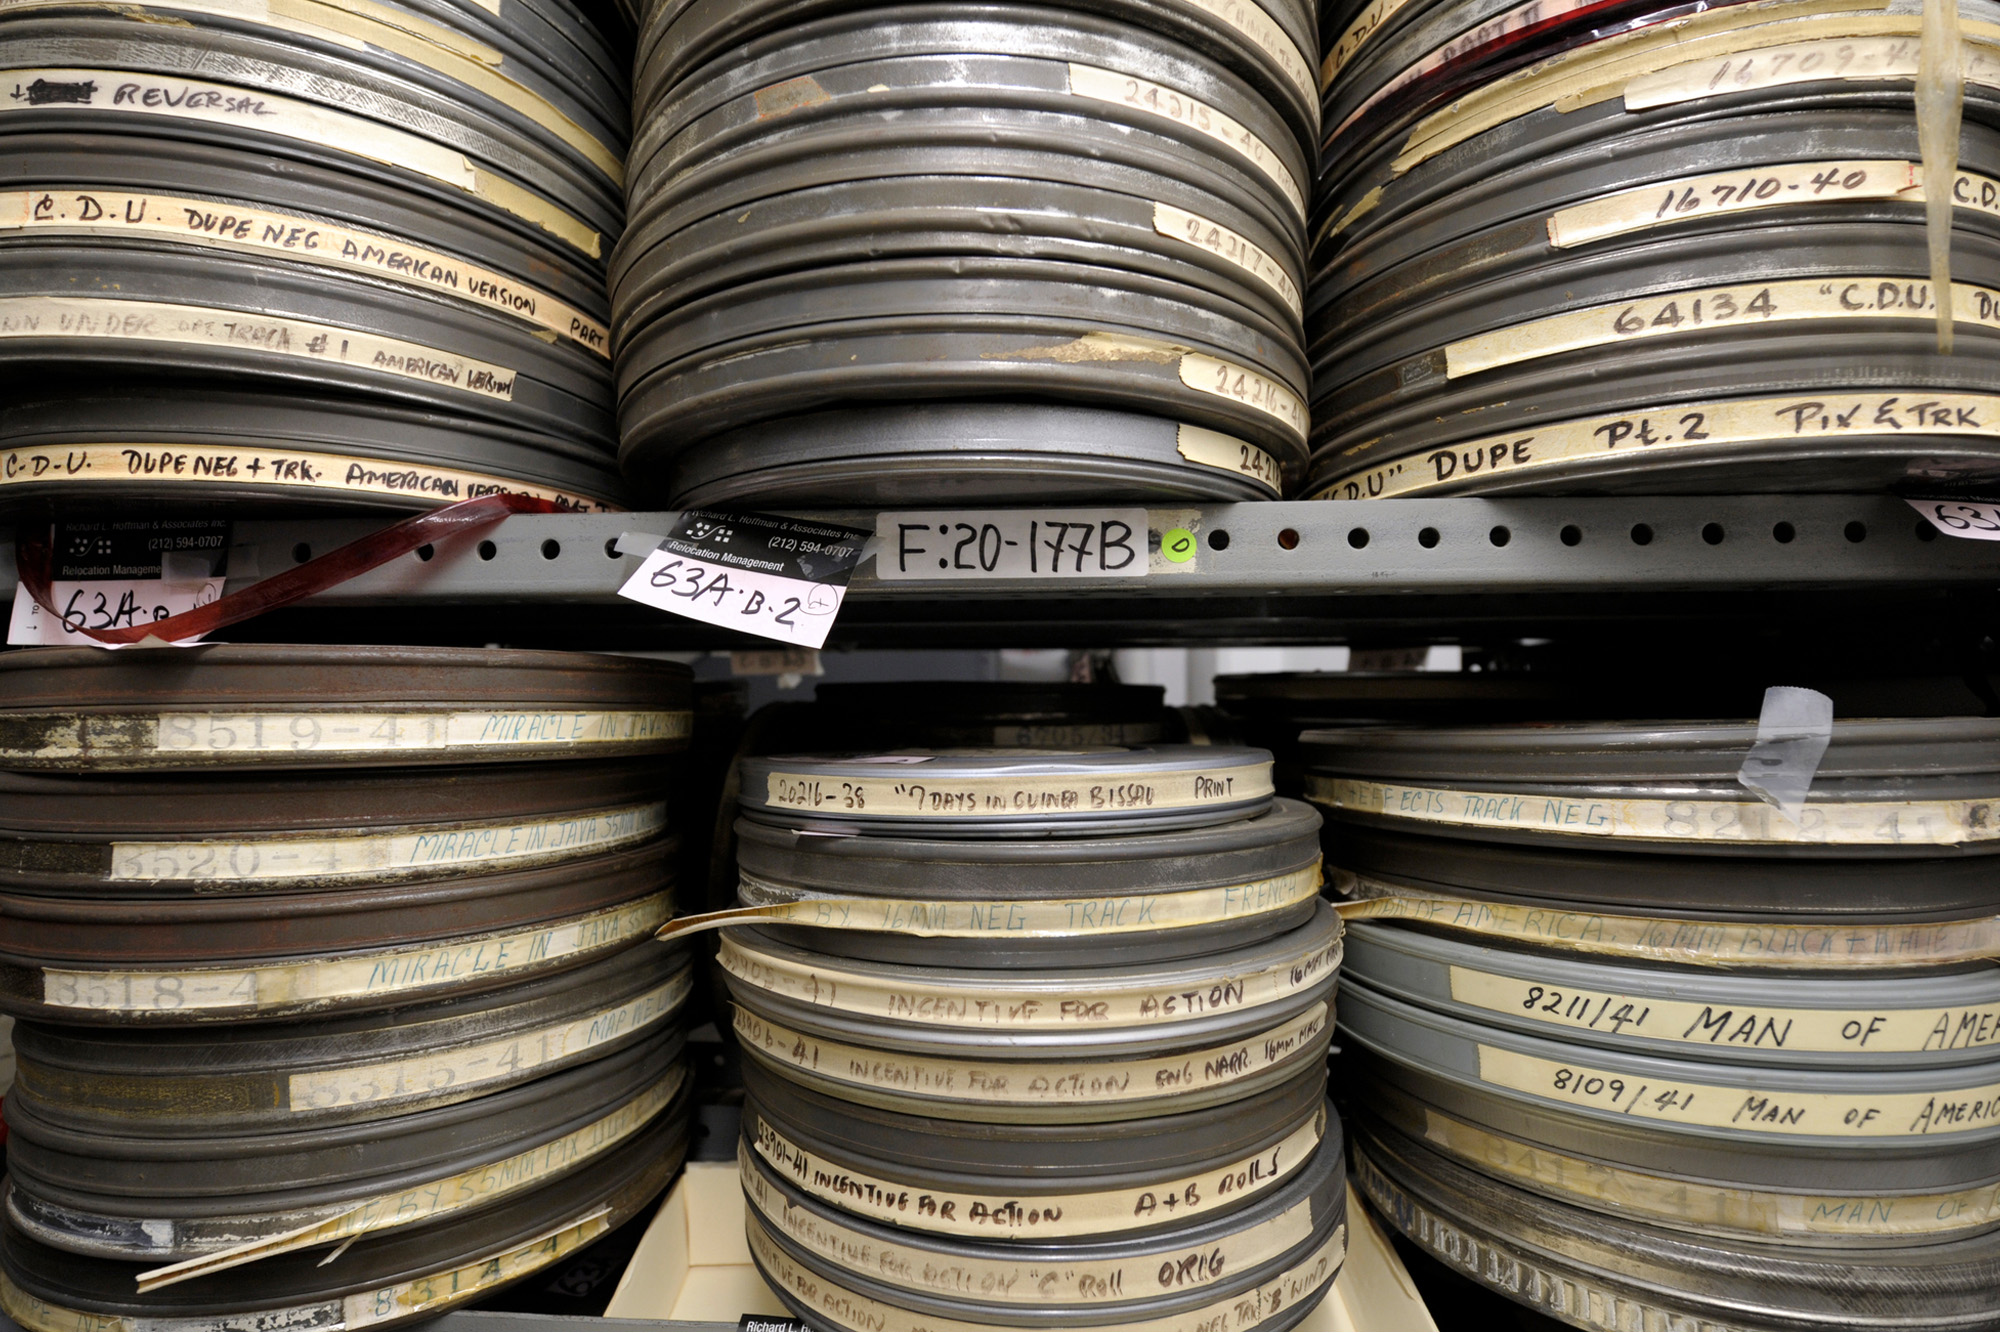 Stacks of film reels in the Department of Global Communication (DGC) audiovisual archives at UN Headquarters